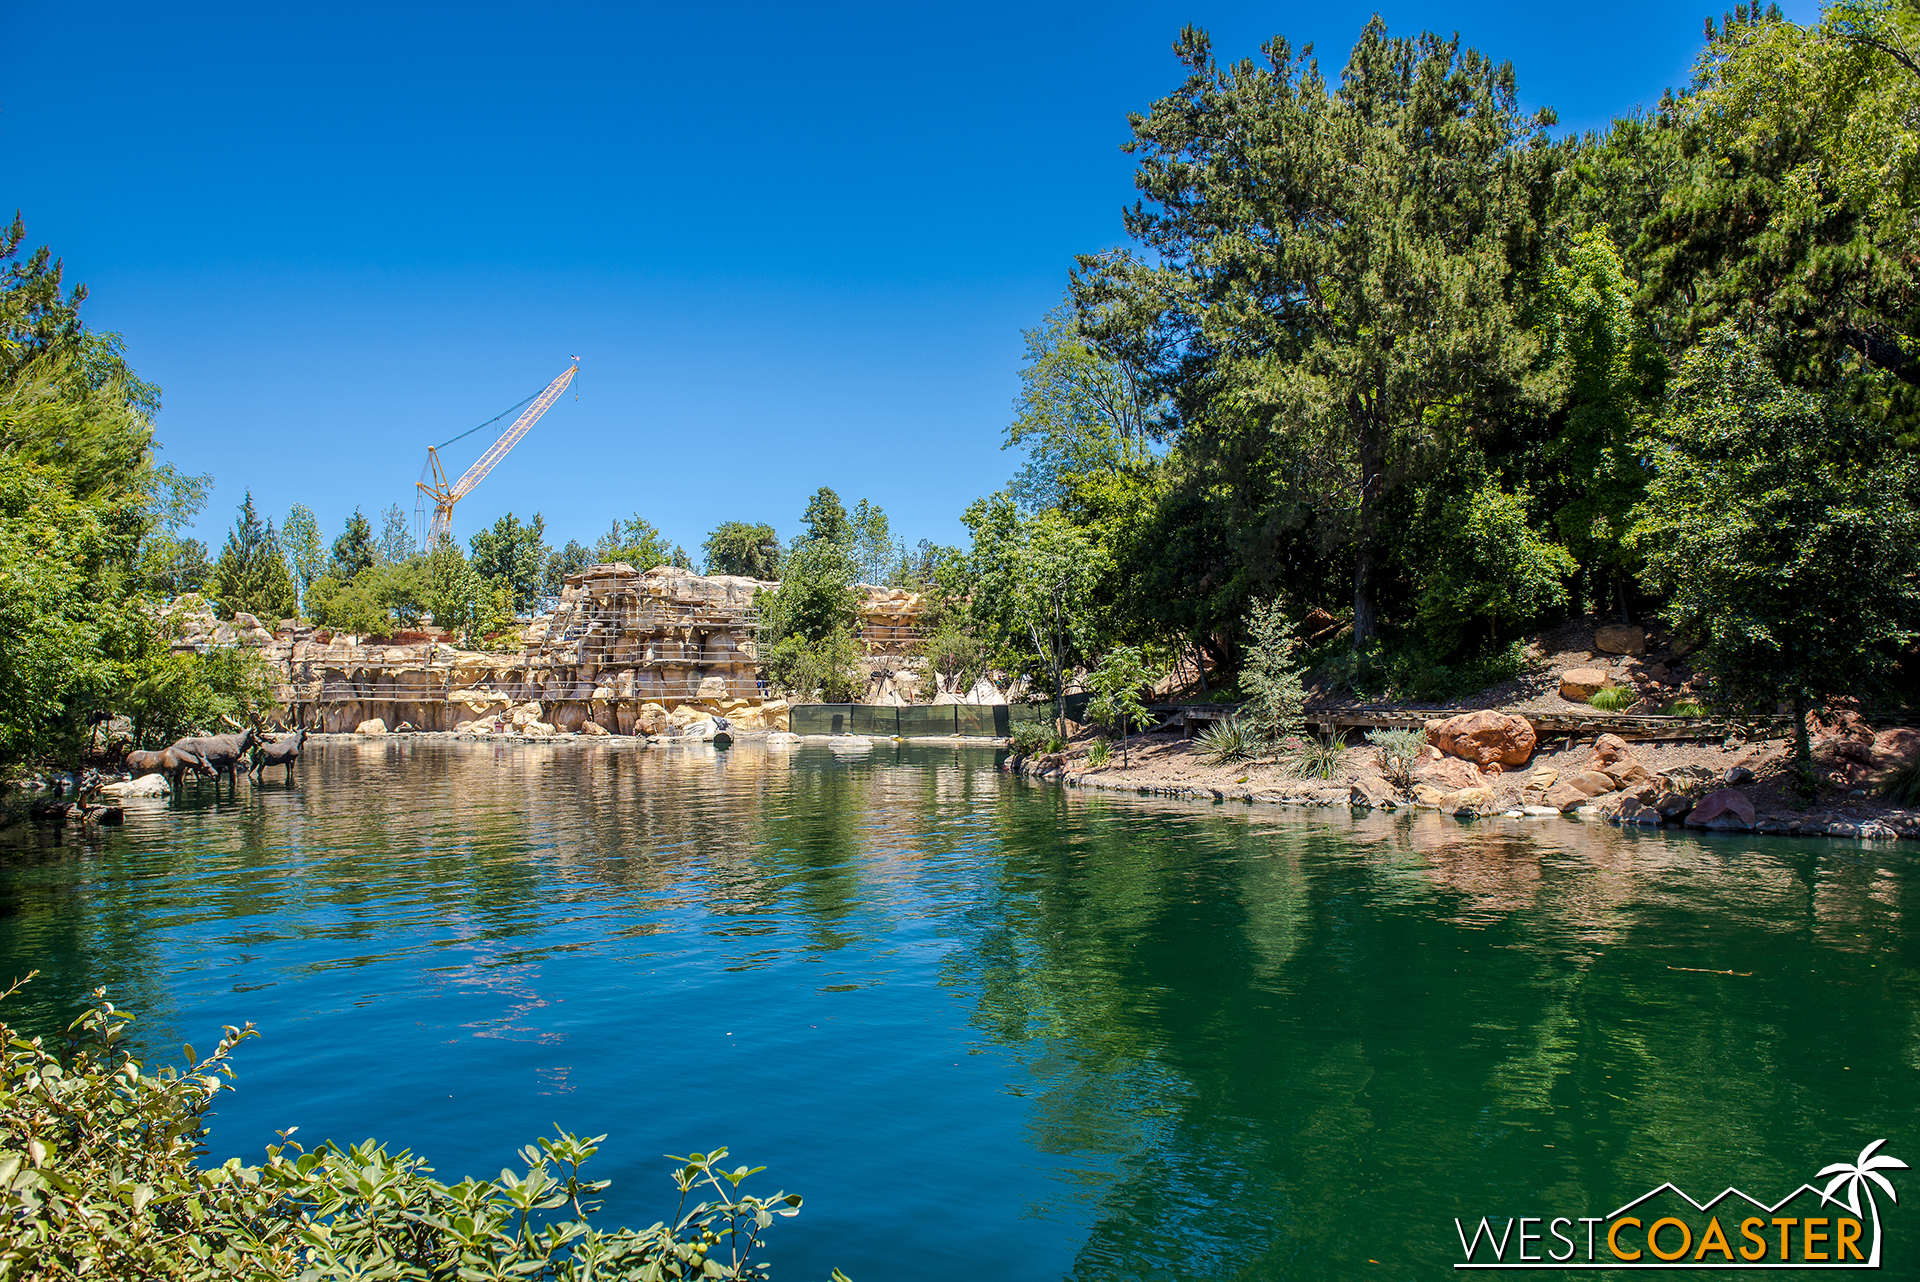  Zooming back out, we can see the old Mine Train to Nature's Wonderland tracks haven't gone away either. 